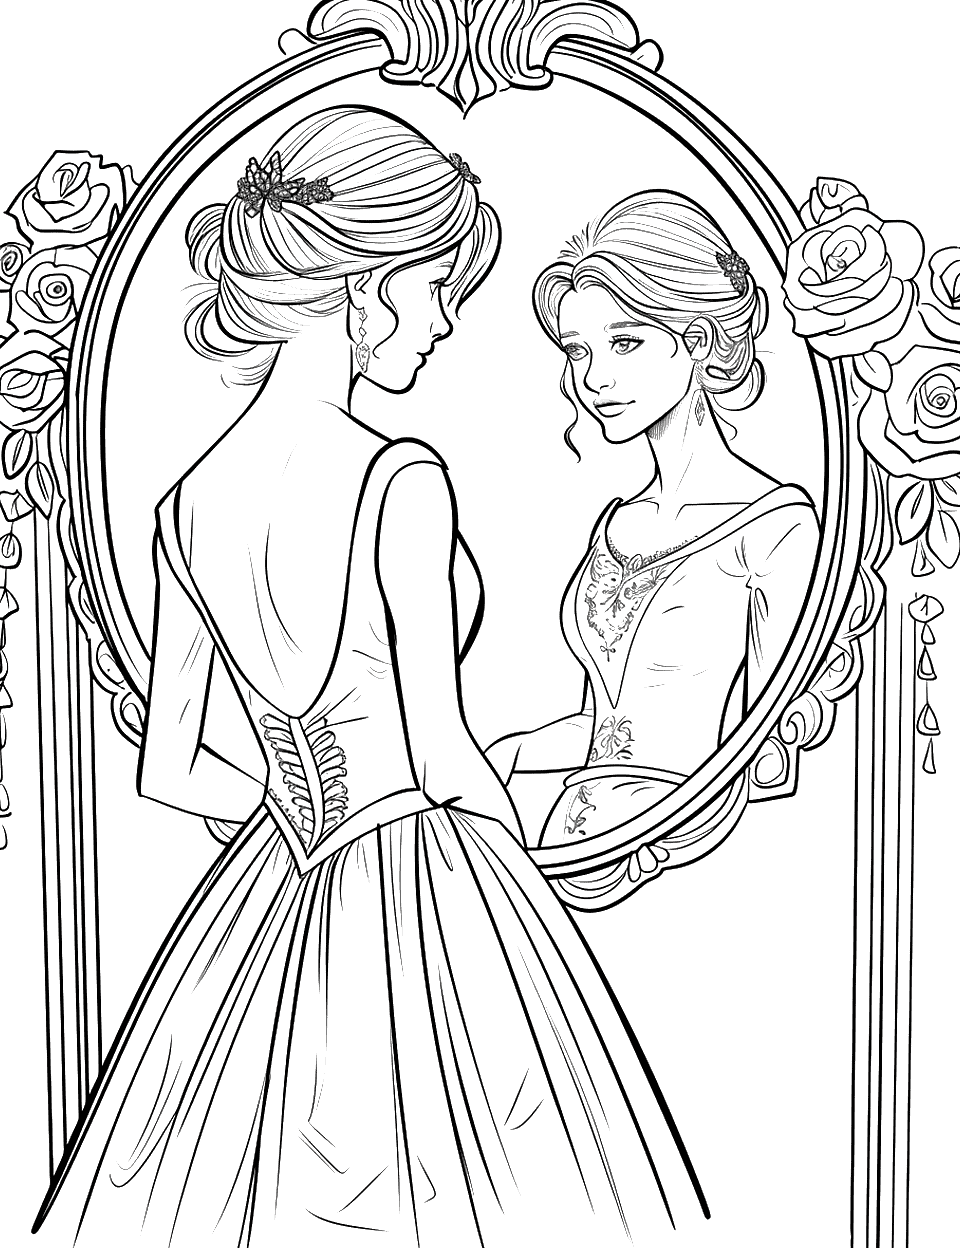 Realistic Bride Portrait Wedding Coloring Page - A detailed, realistic drawing of a bride looking into a mirror.